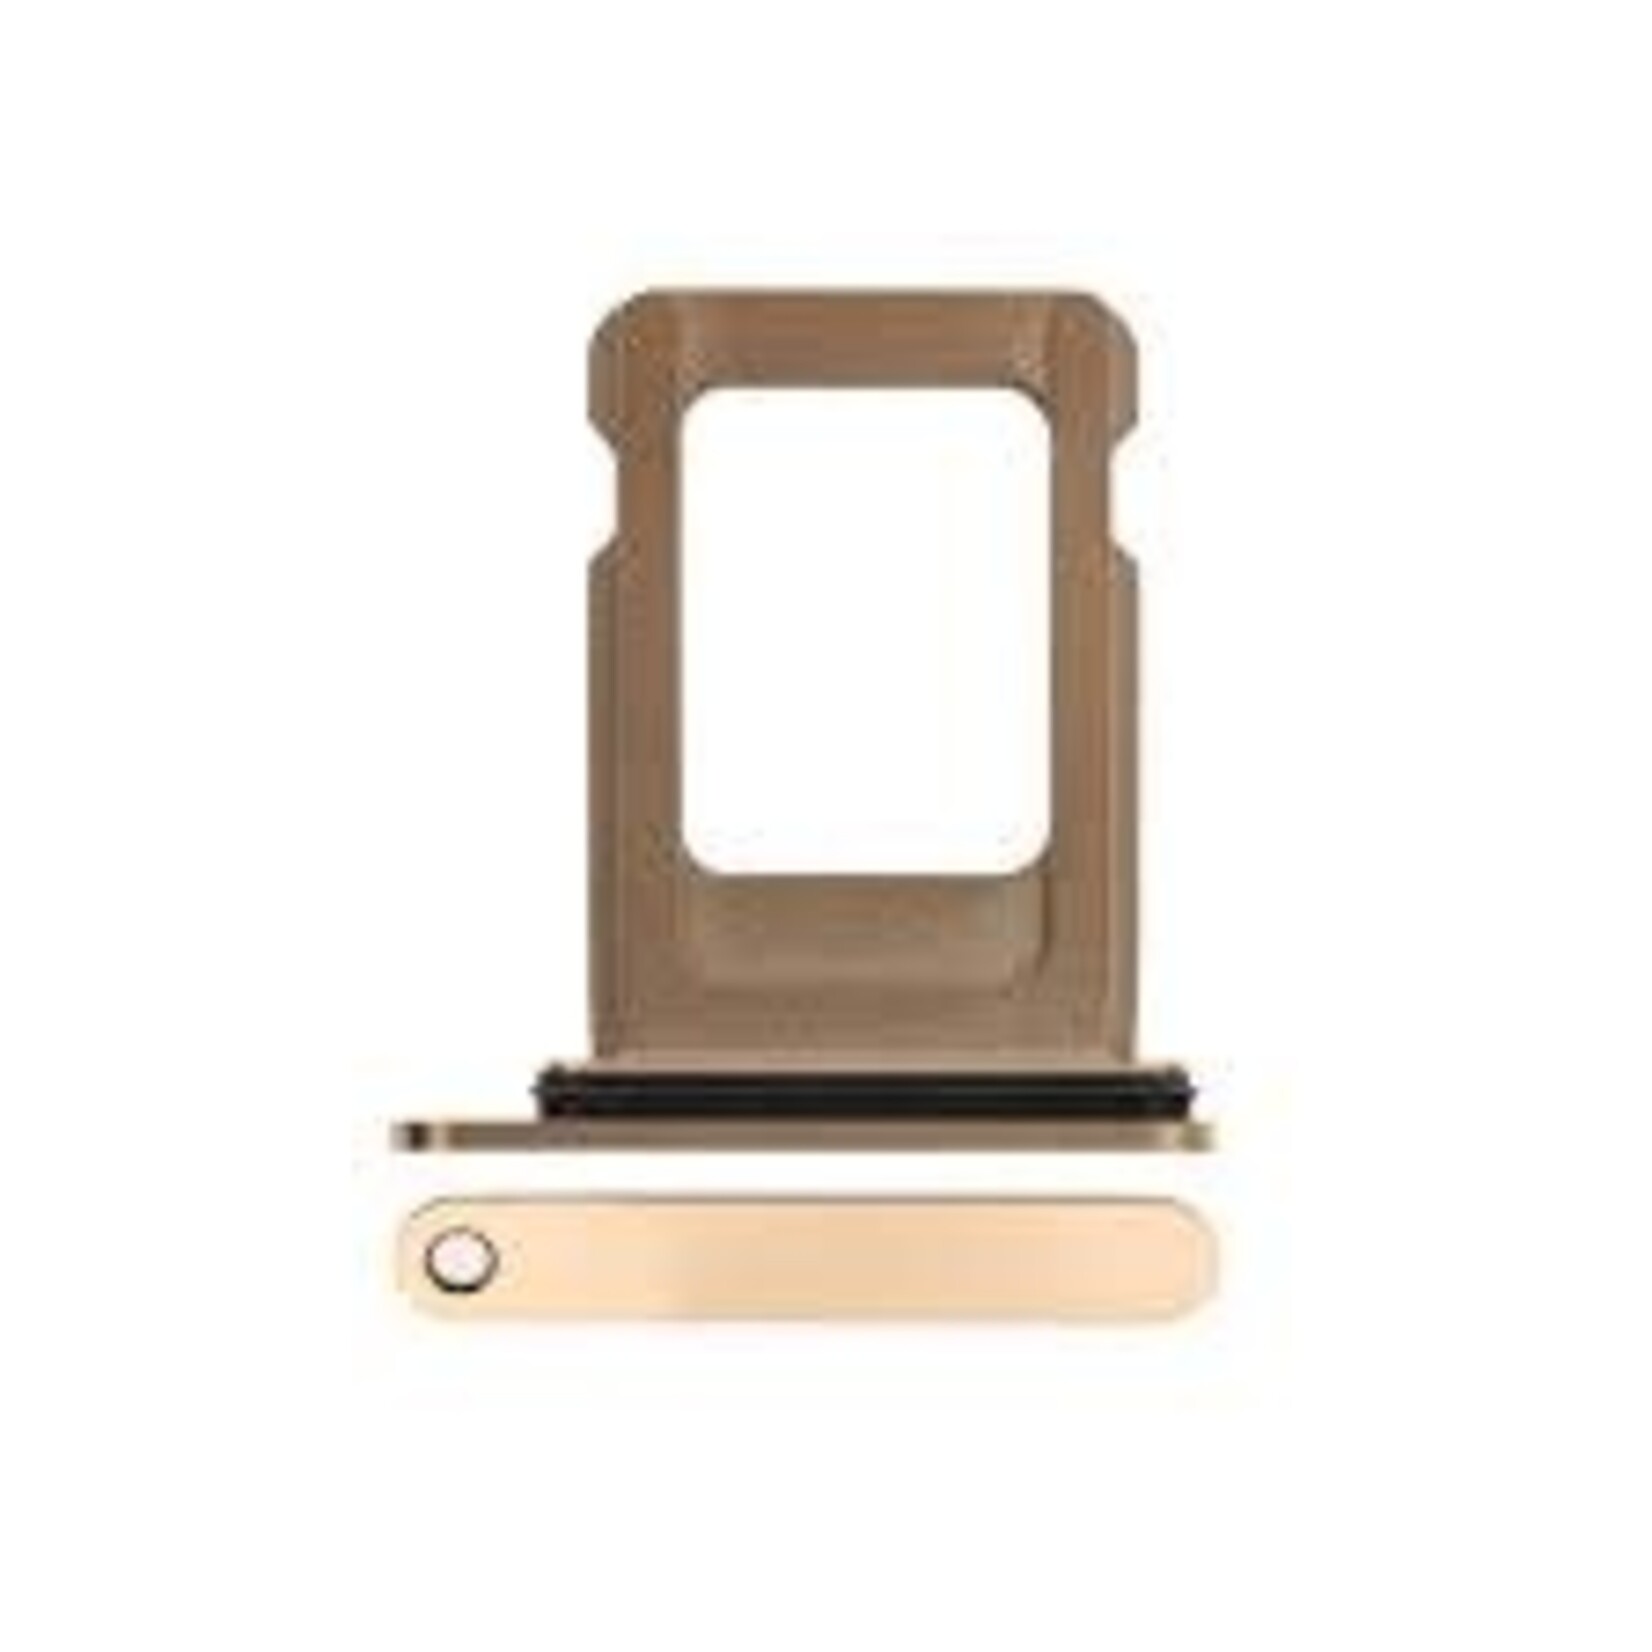 Apple SIM TRAY POUR IPHONE 12 PRO MAX - gold/or